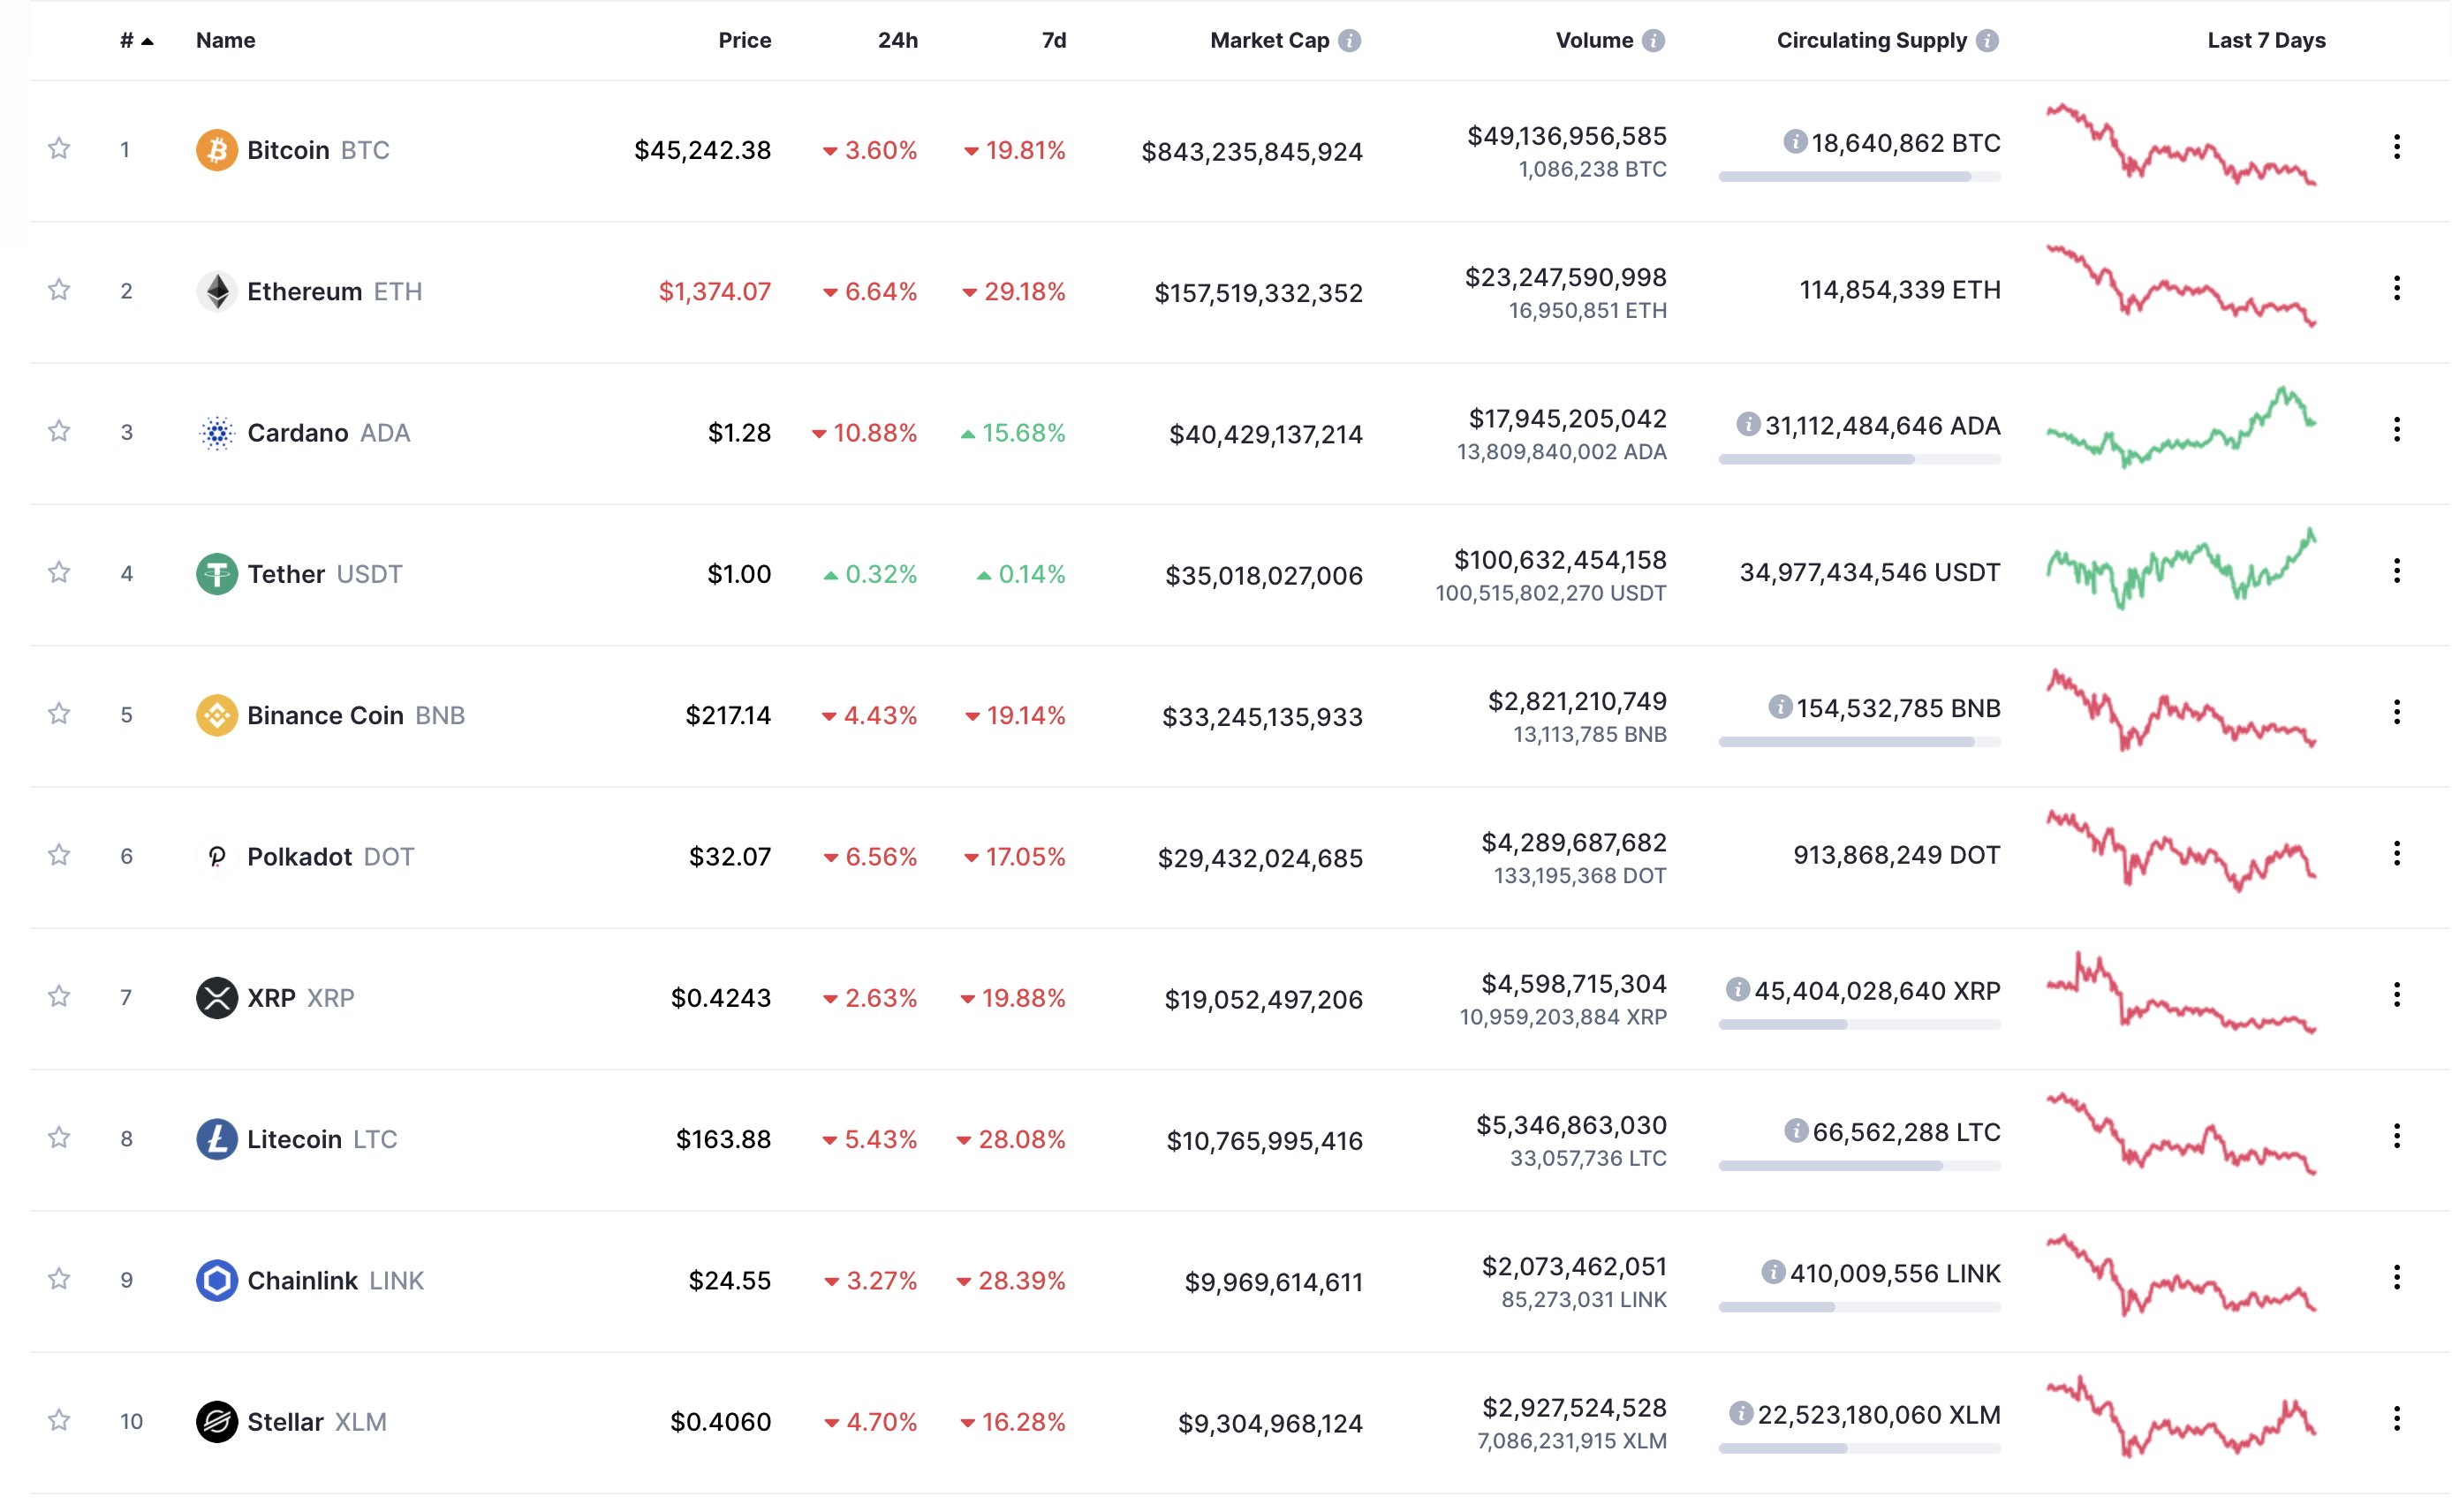 CoinMarketCap on X: "The current top 10 cryptocurrencies by market cap are  in the image below, what do you think will be the top ten by the end of  March? Get your